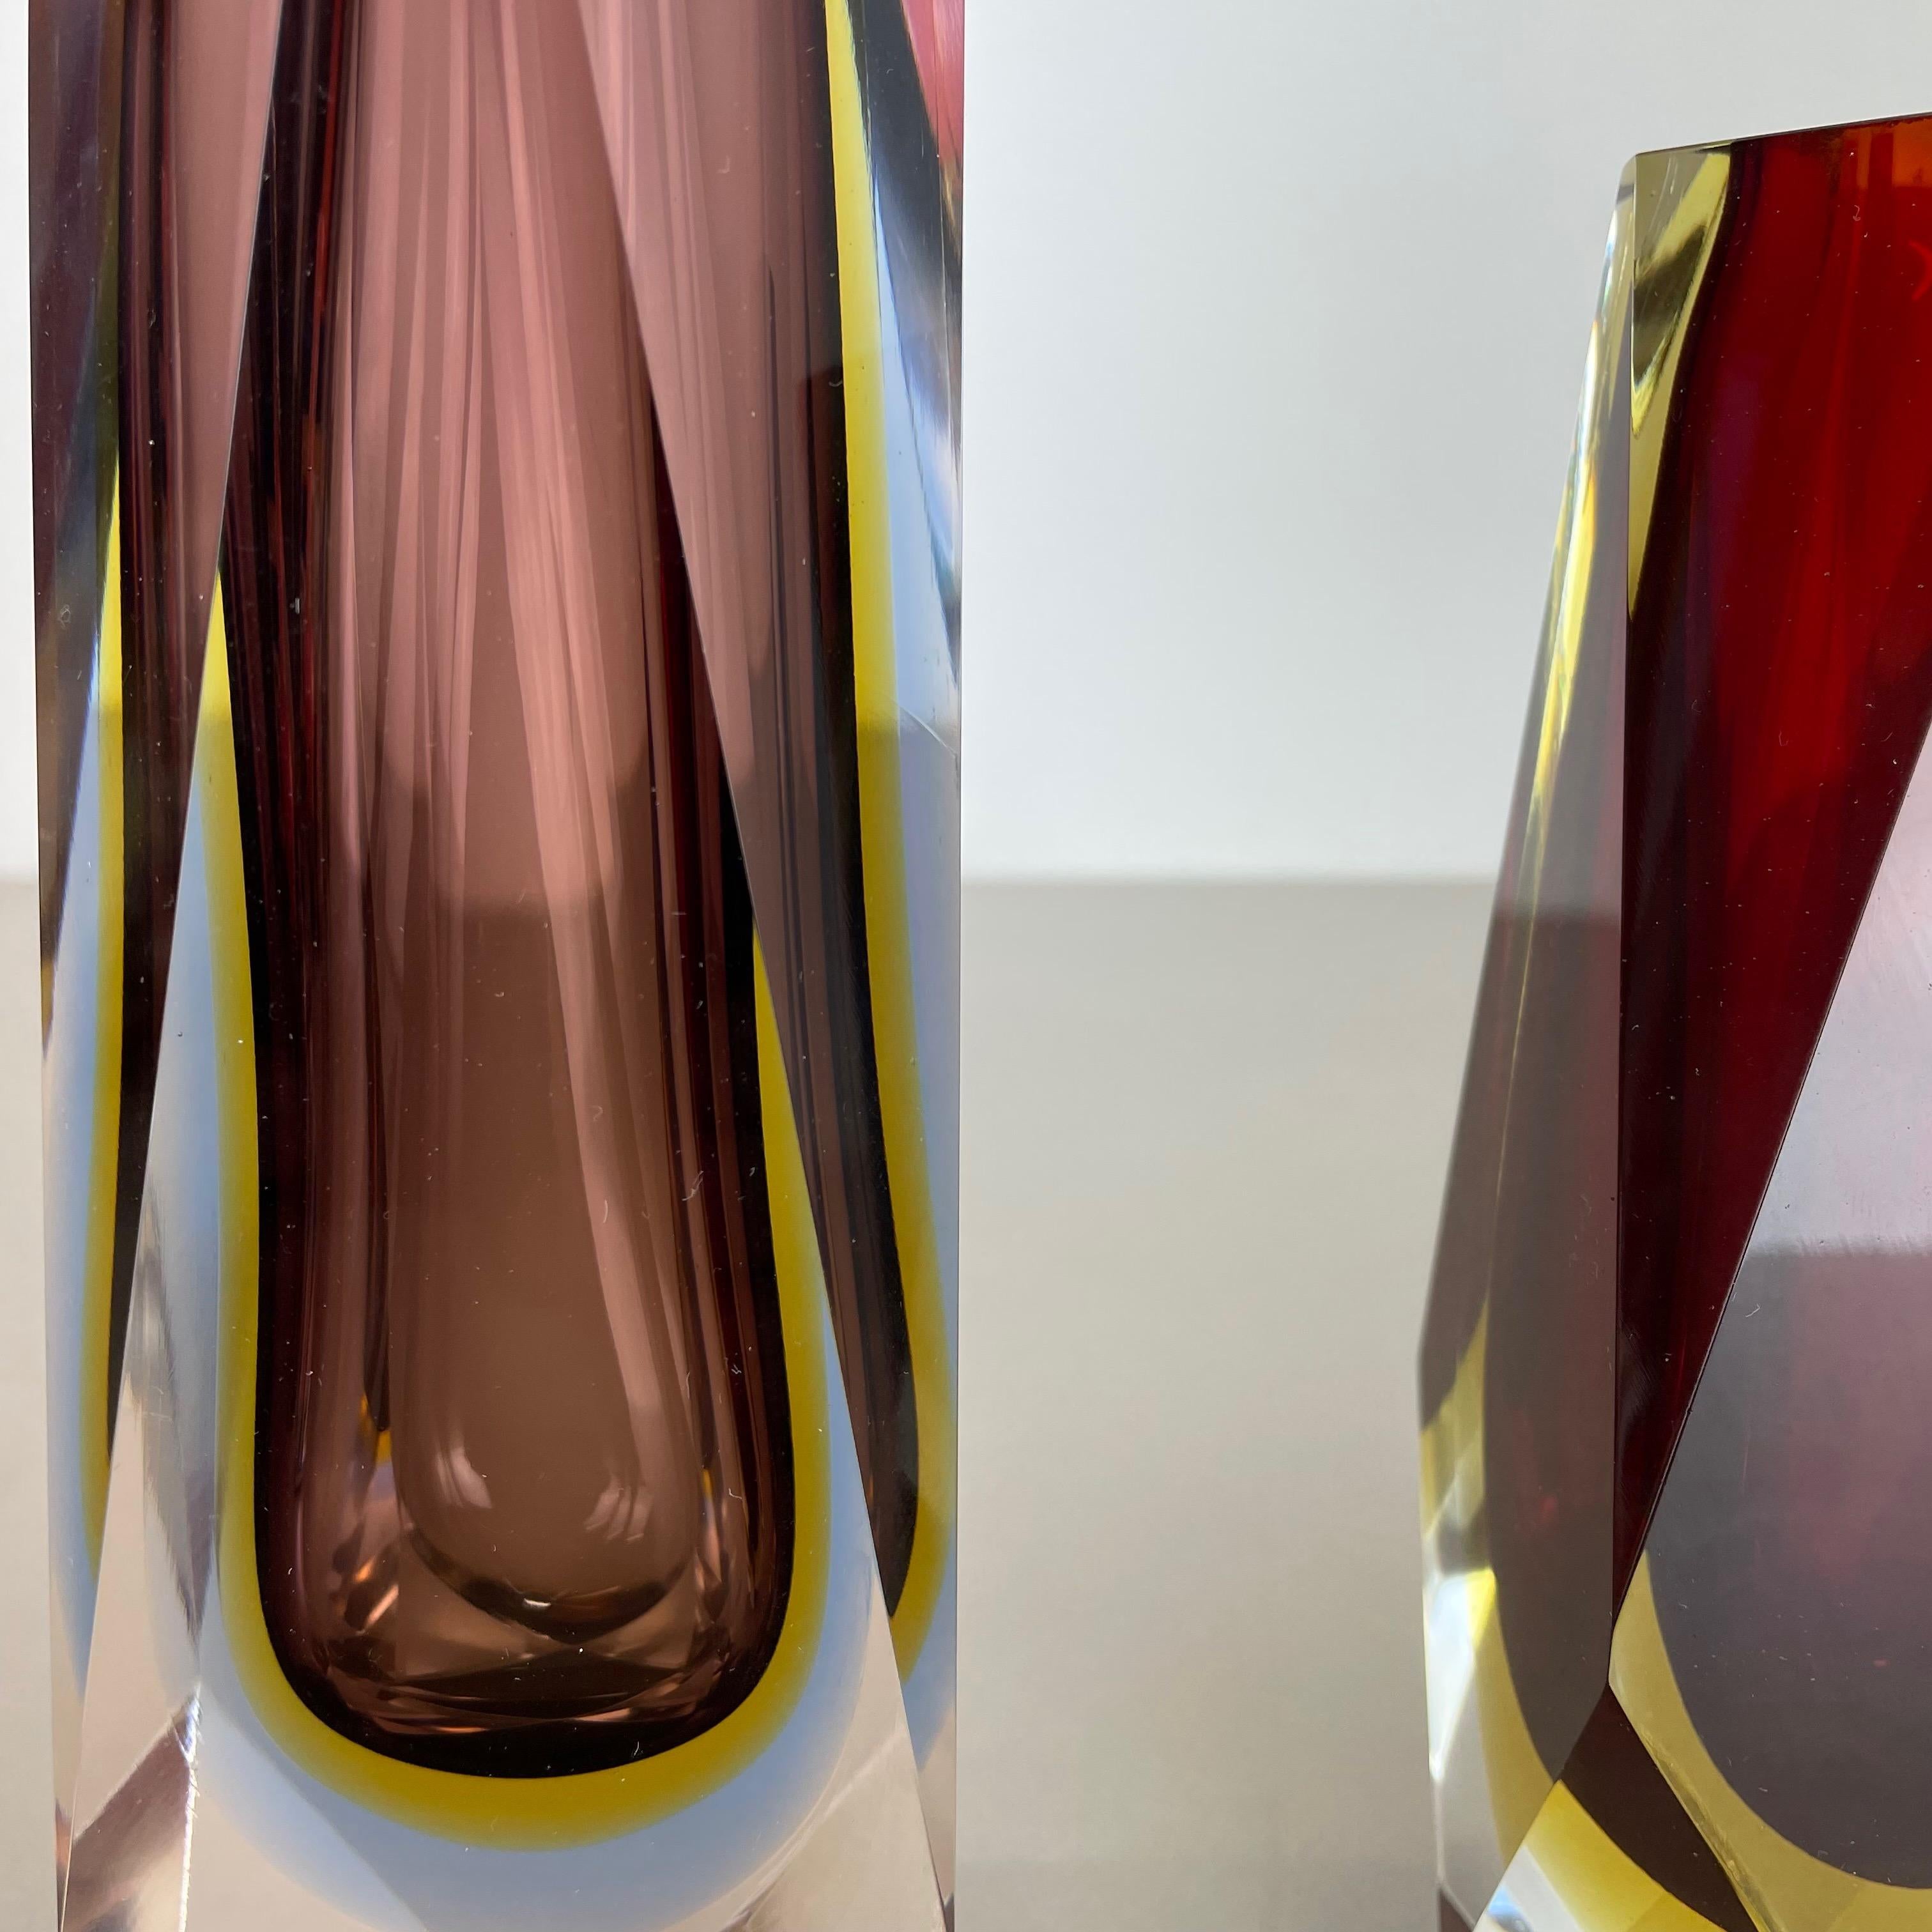 Set of 2 Faceted Murano Glass Sommerso Vase Designed by Flavio Poli Italy, 1970s For Sale 1